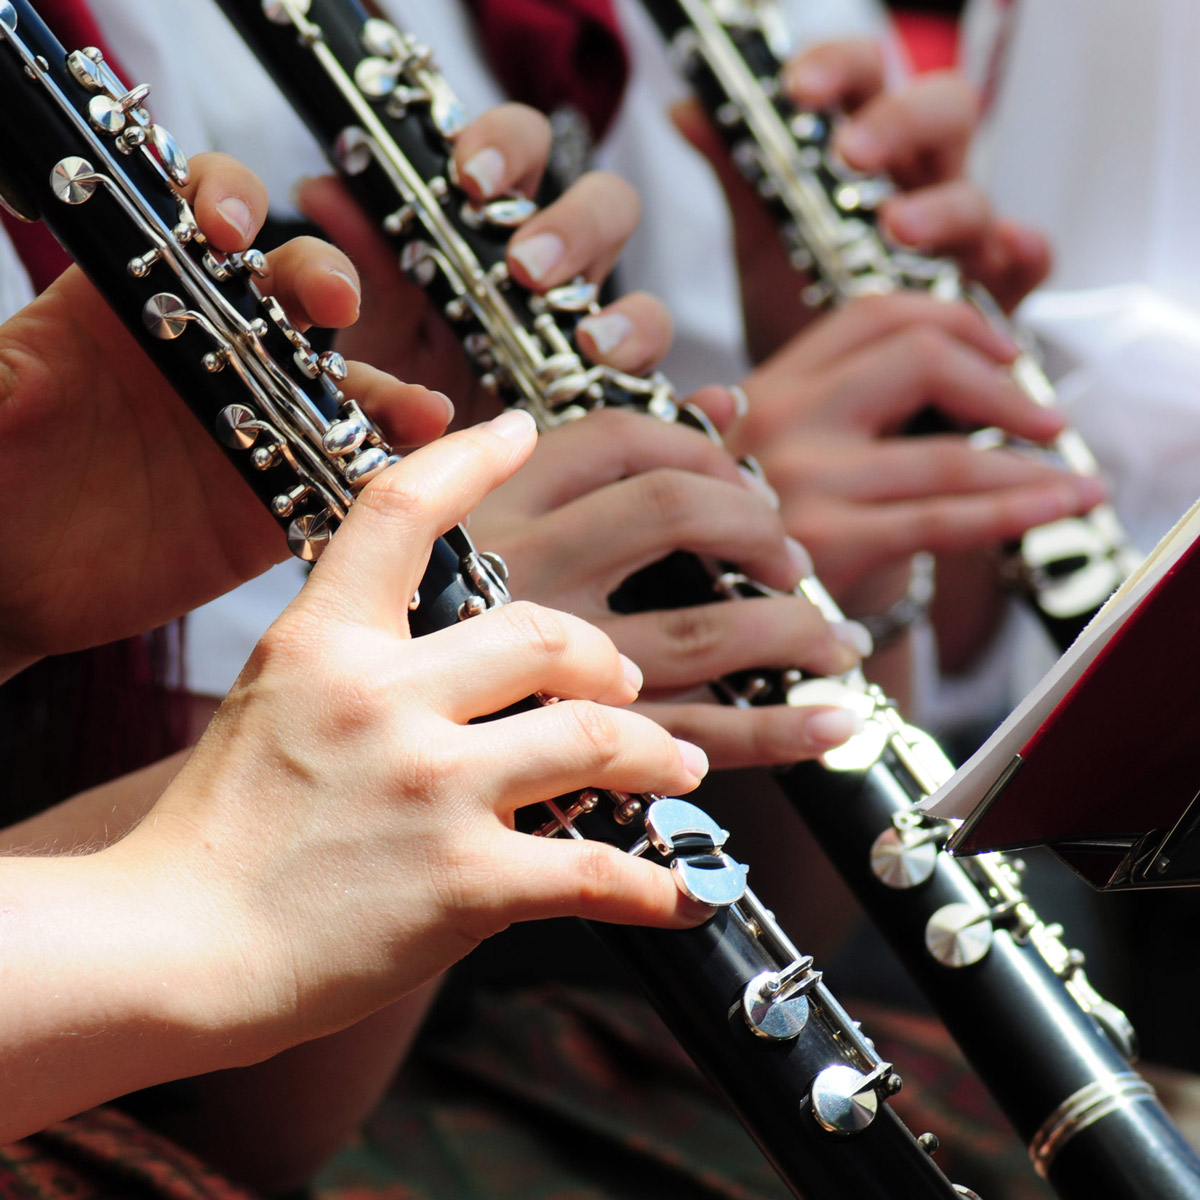 Clarinet lessons in Wollongong